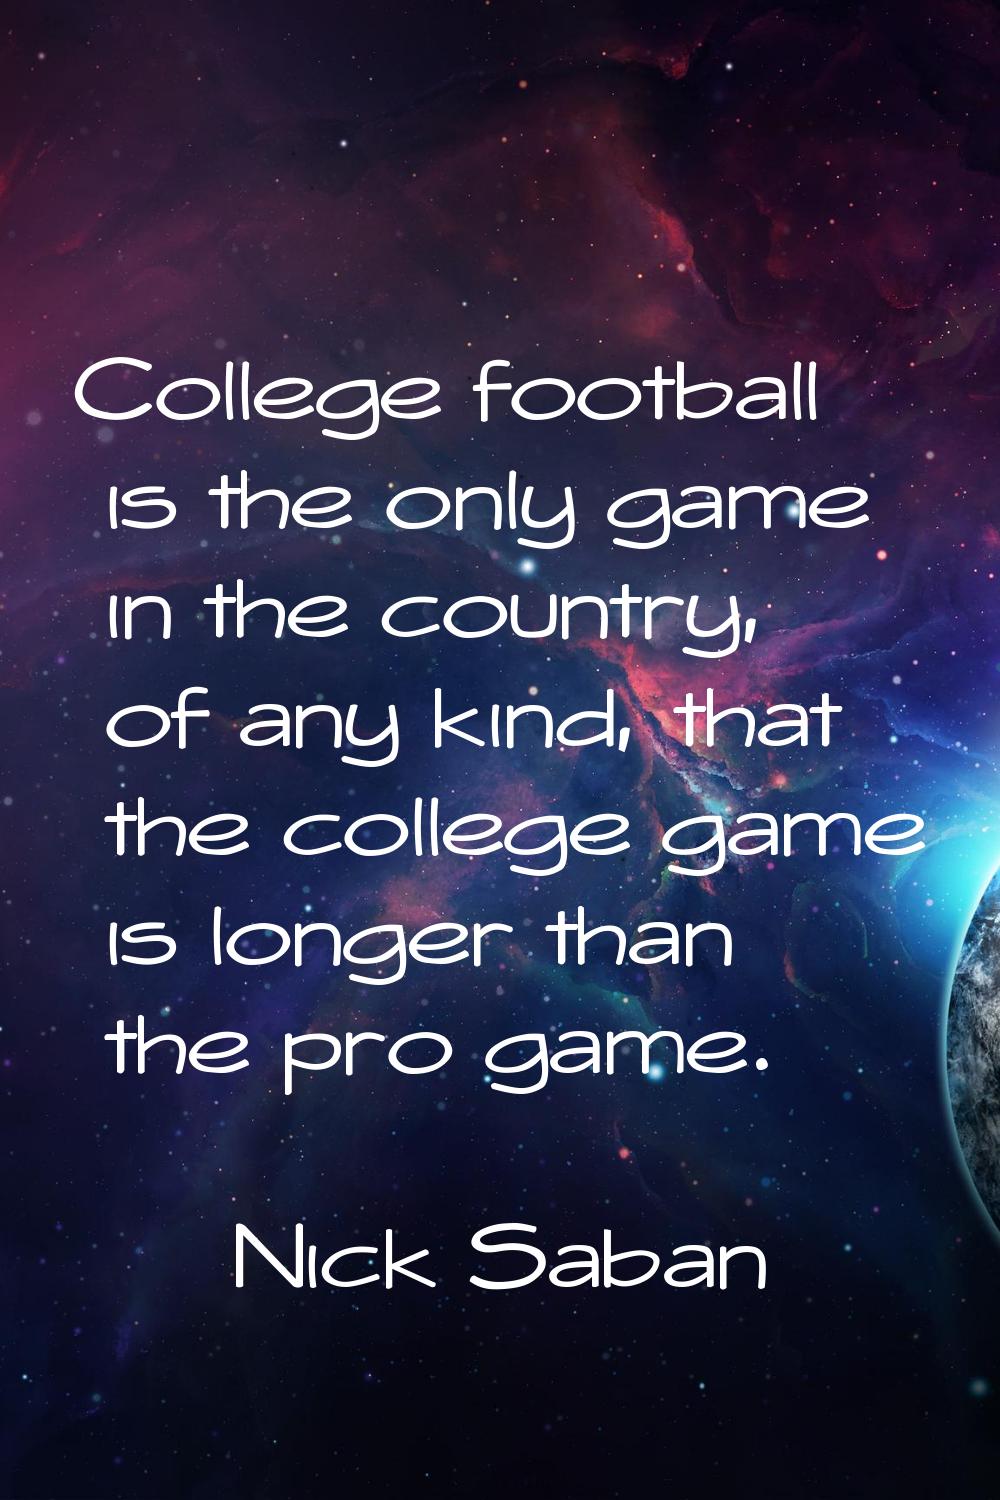 College football is the only game in the country, of any kind, that the college game is longer than